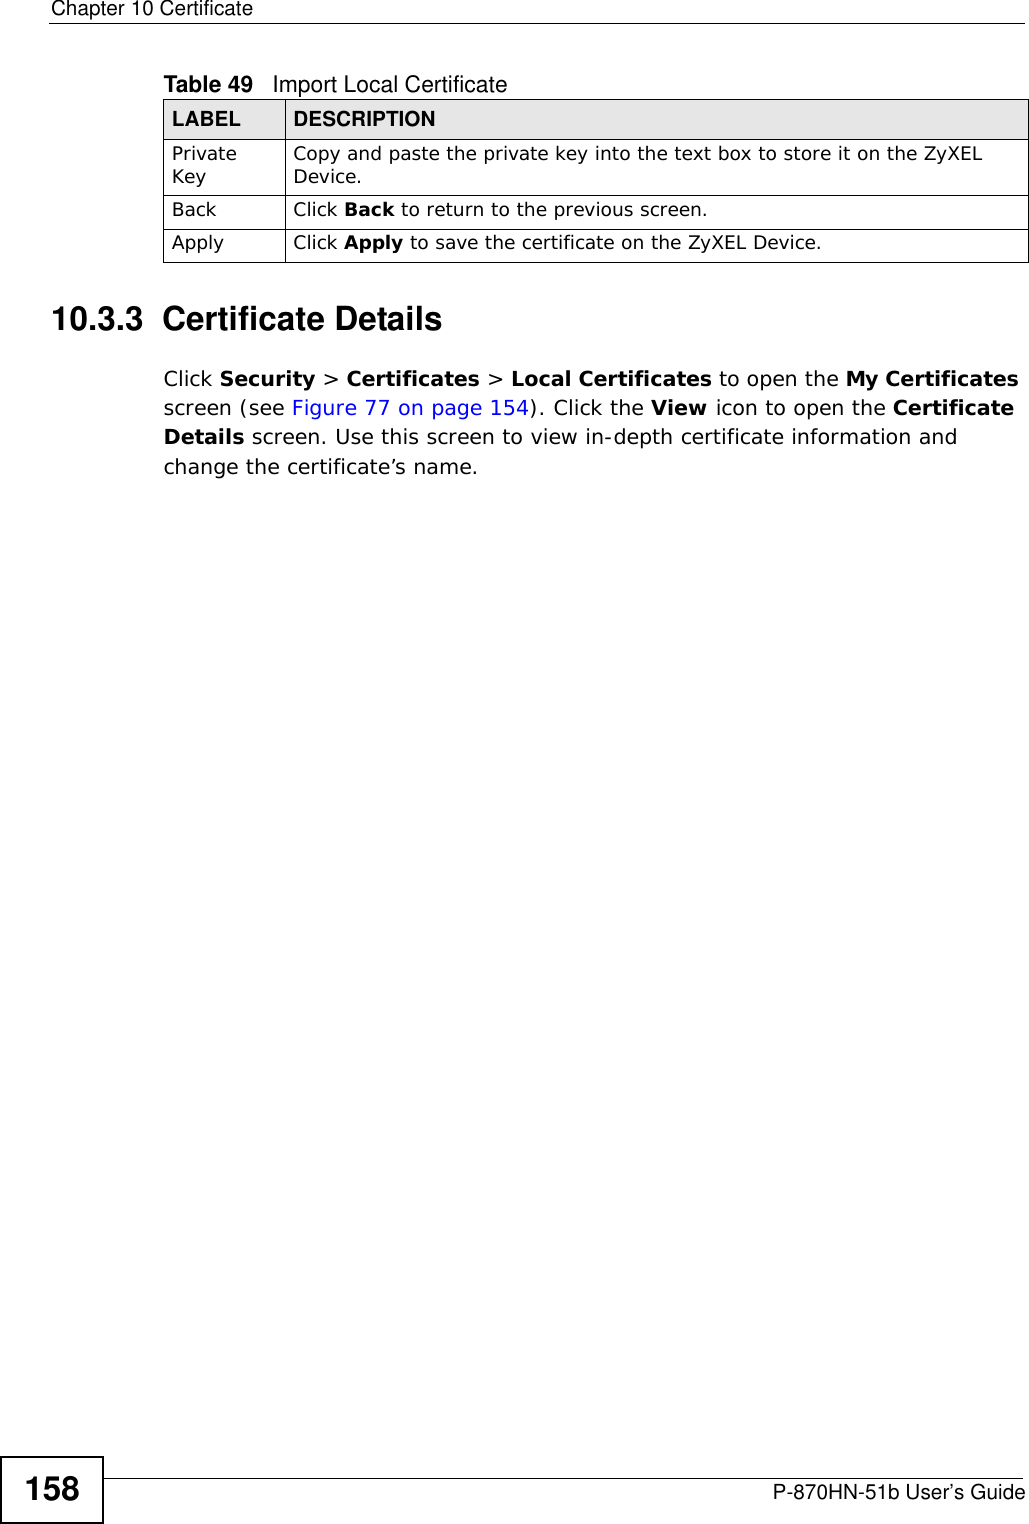 Chapter 10 CertificateP-870HN-51b User’s Guide15810.3.3  Certificate Details Click Security &gt; Certificates &gt; Local Certificates to open the My Certificates screen (see Figure 77 on page 154). Click the View icon to open the Certificate Details screen. Use this screen to view in-depth certificate information and change the certificate’s name. Private Key Copy and paste the private key into the text box to store it on the ZyXEL Device.Back Click Back to return to the previous screen.Apply Click Apply to save the certificate on the ZyXEL Device.Table 49   Import Local CertificateLABEL DESCRIPTION